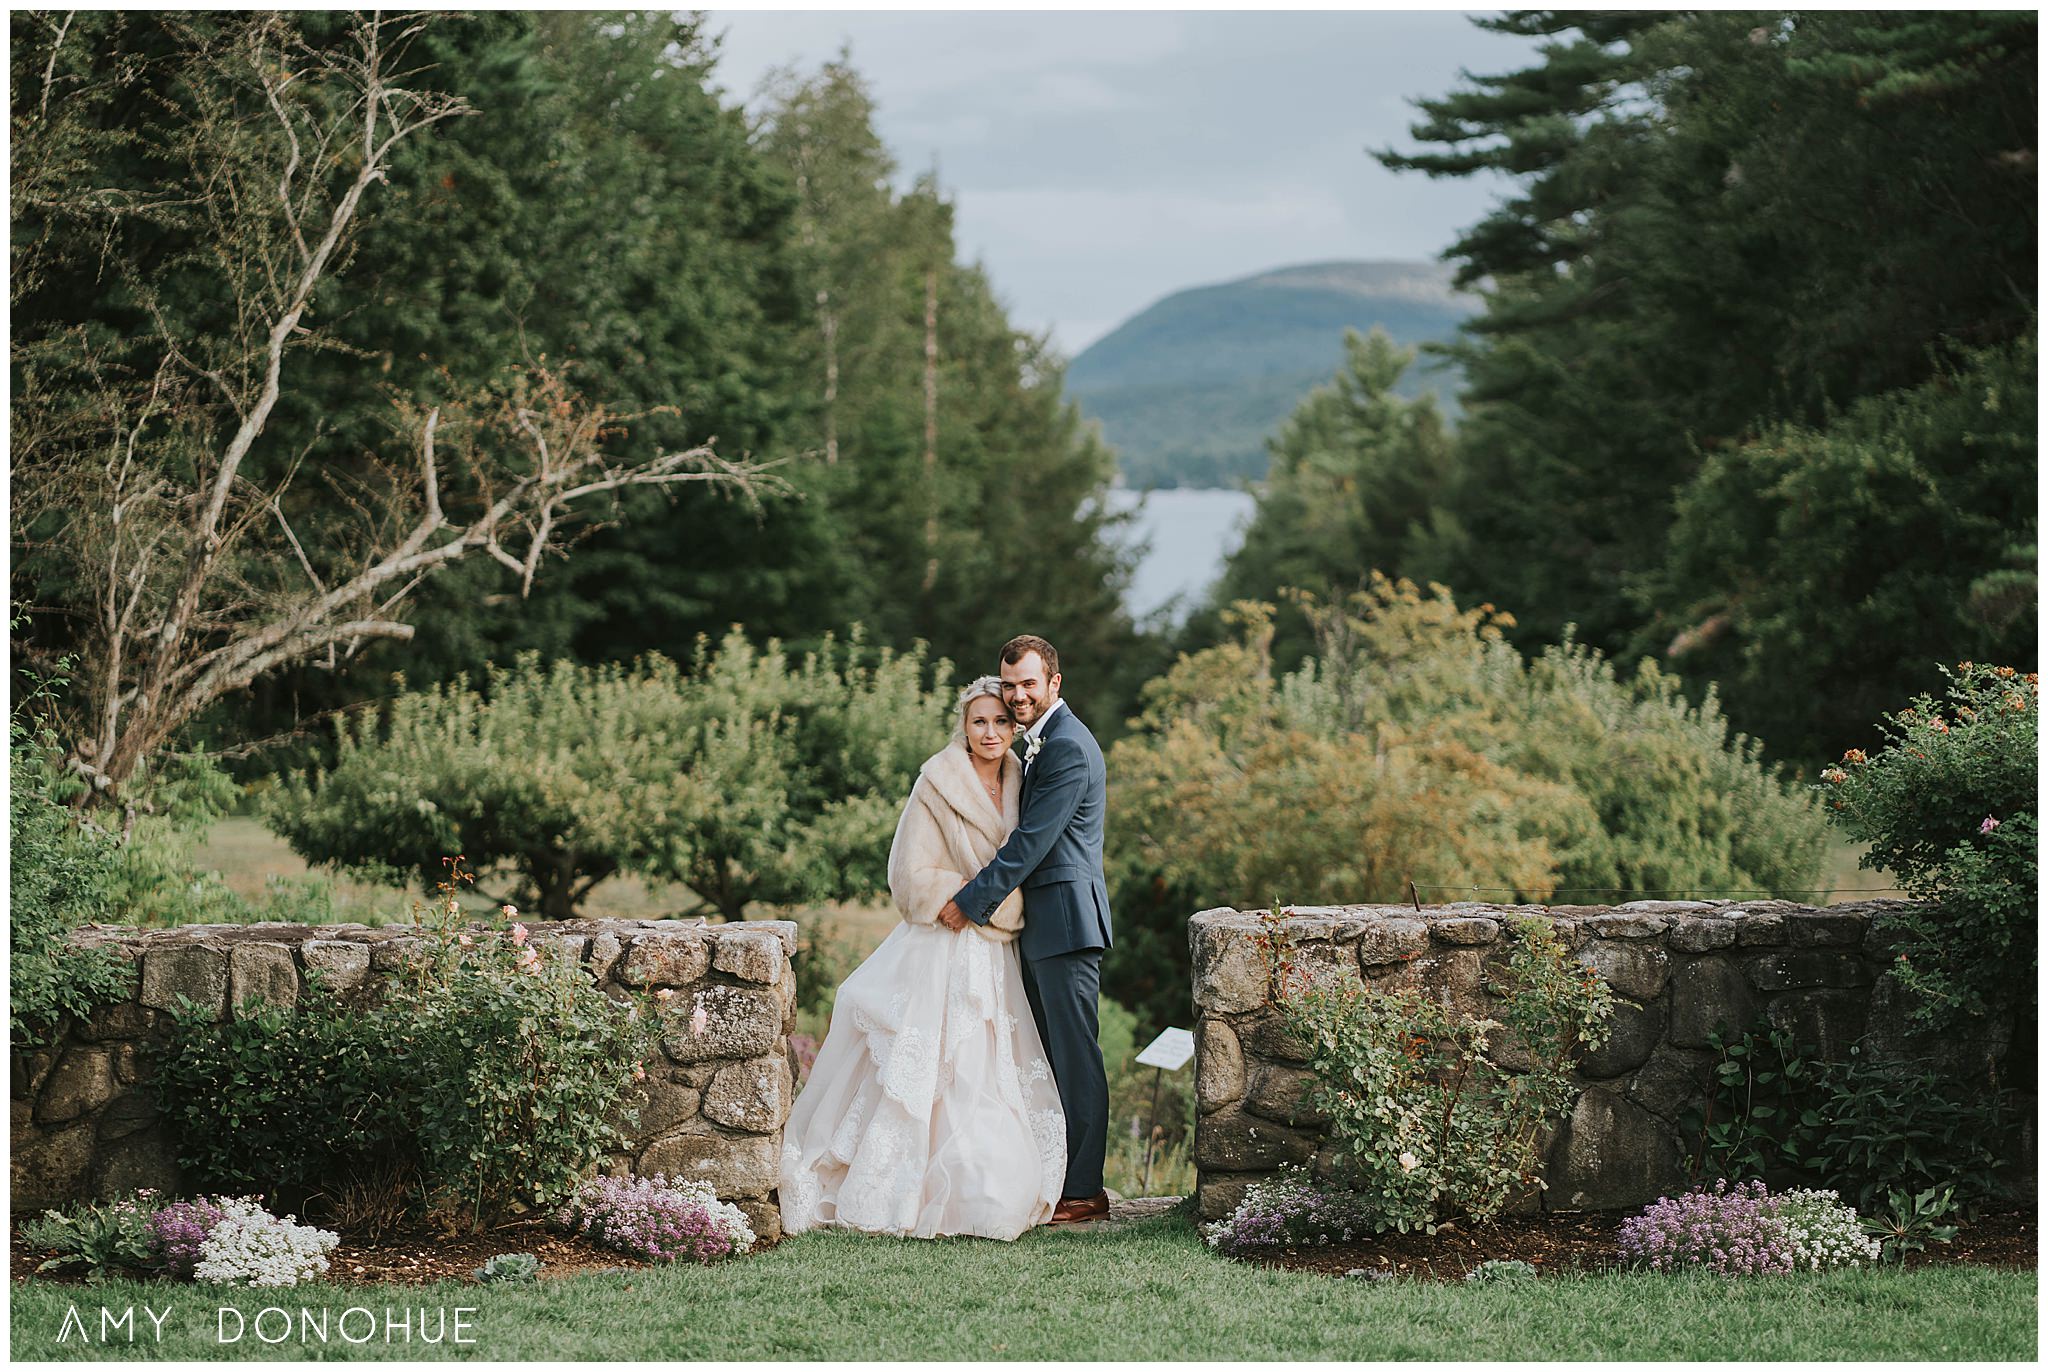 Bride and Groom Portraits| New Hampshire Wedding Photographer | Thae Fells | © Amy Donohue Photography